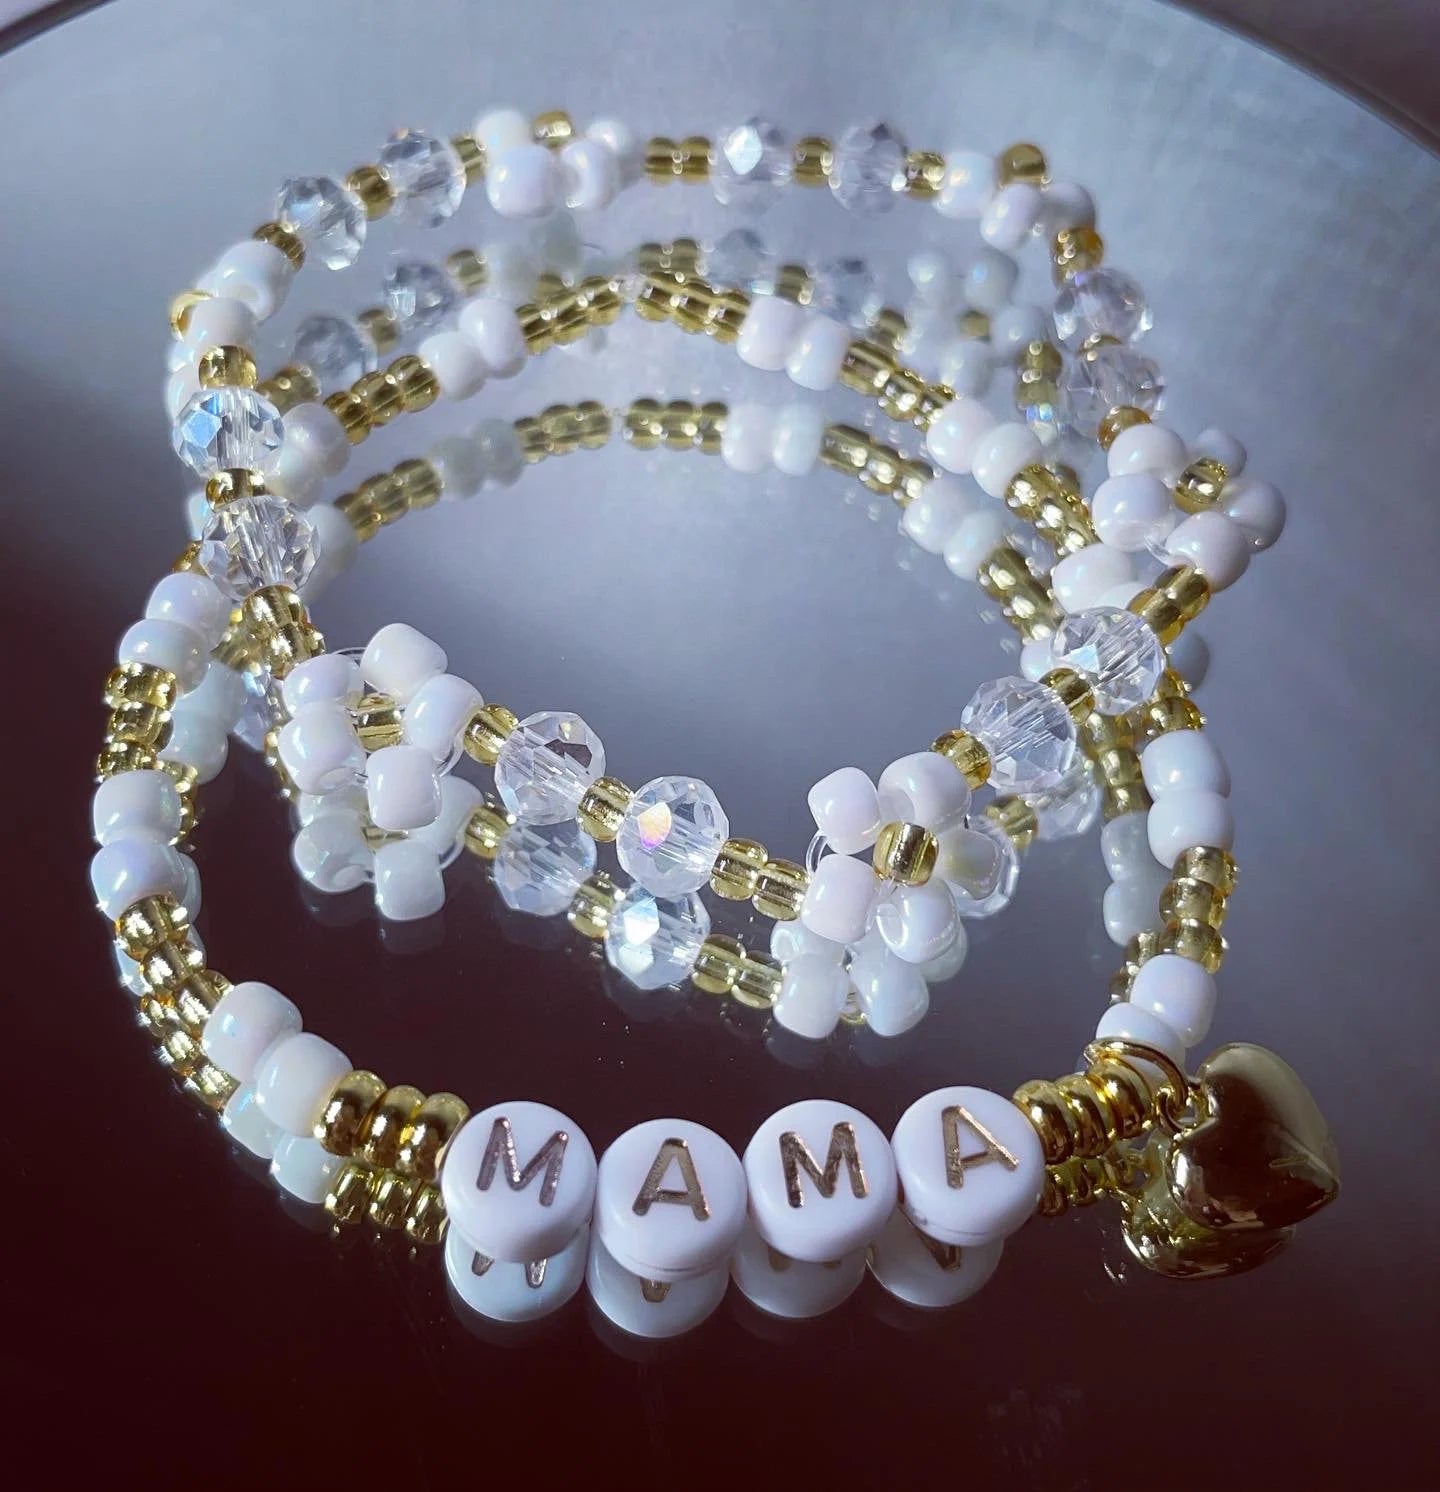 Personalised gold and white beaded flower stack/ mama bracelet stack/ gifts for women/ bracelet stack